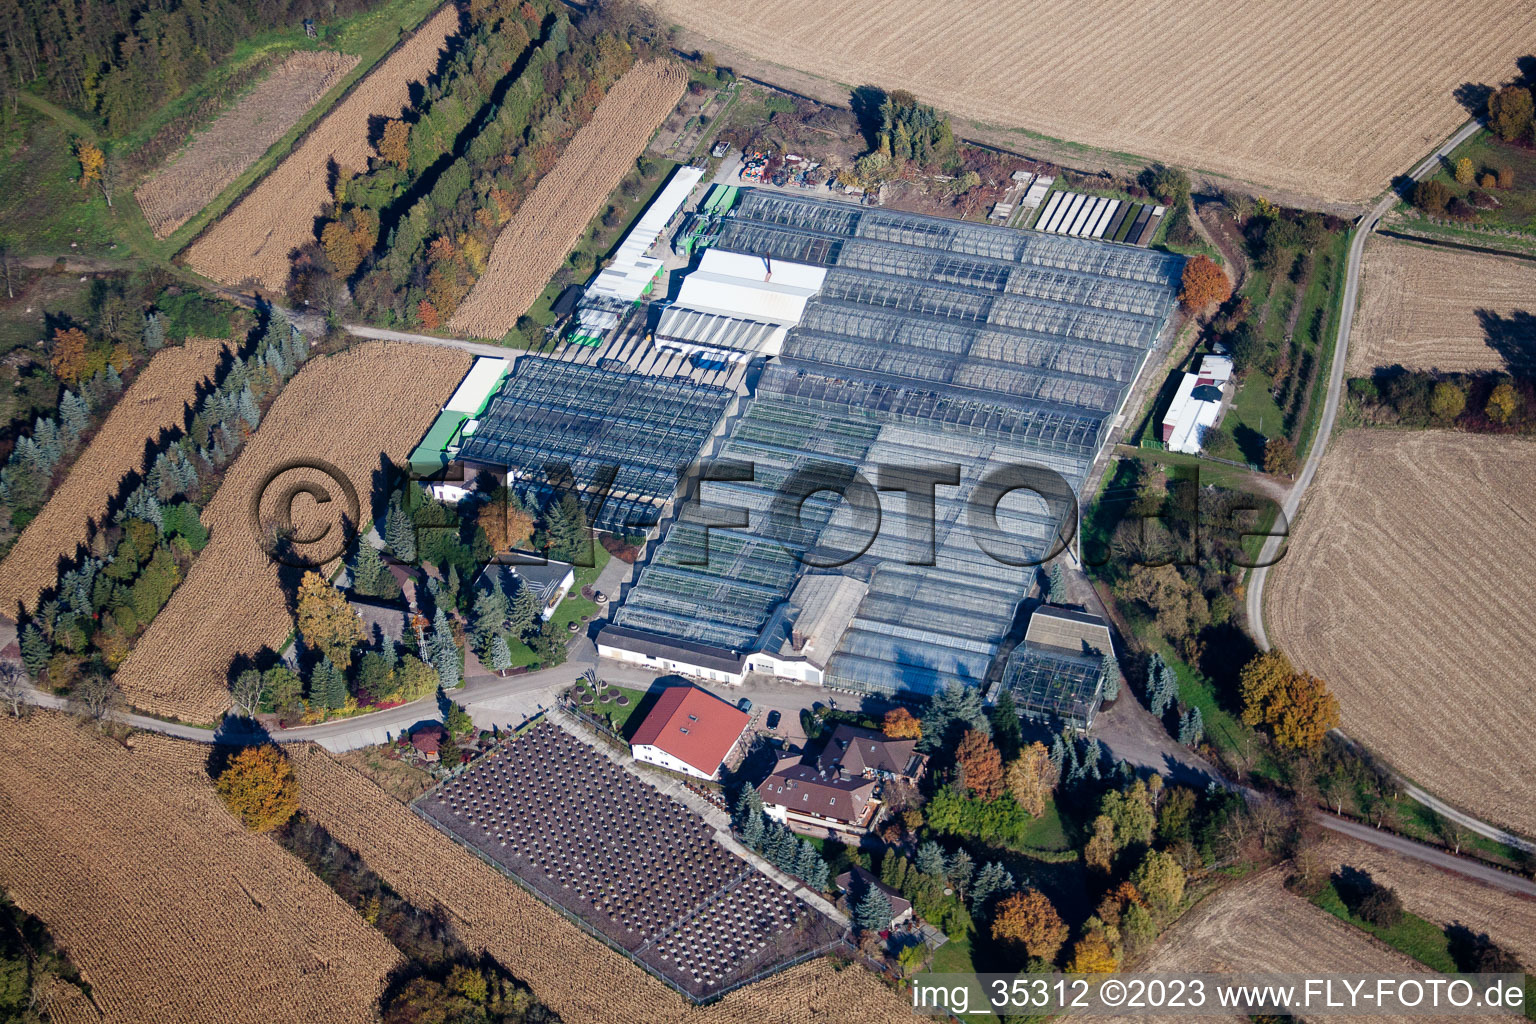 Geranium Endisch GmbH in Hagenbach in the state Rhineland-Palatinate, Germany from above